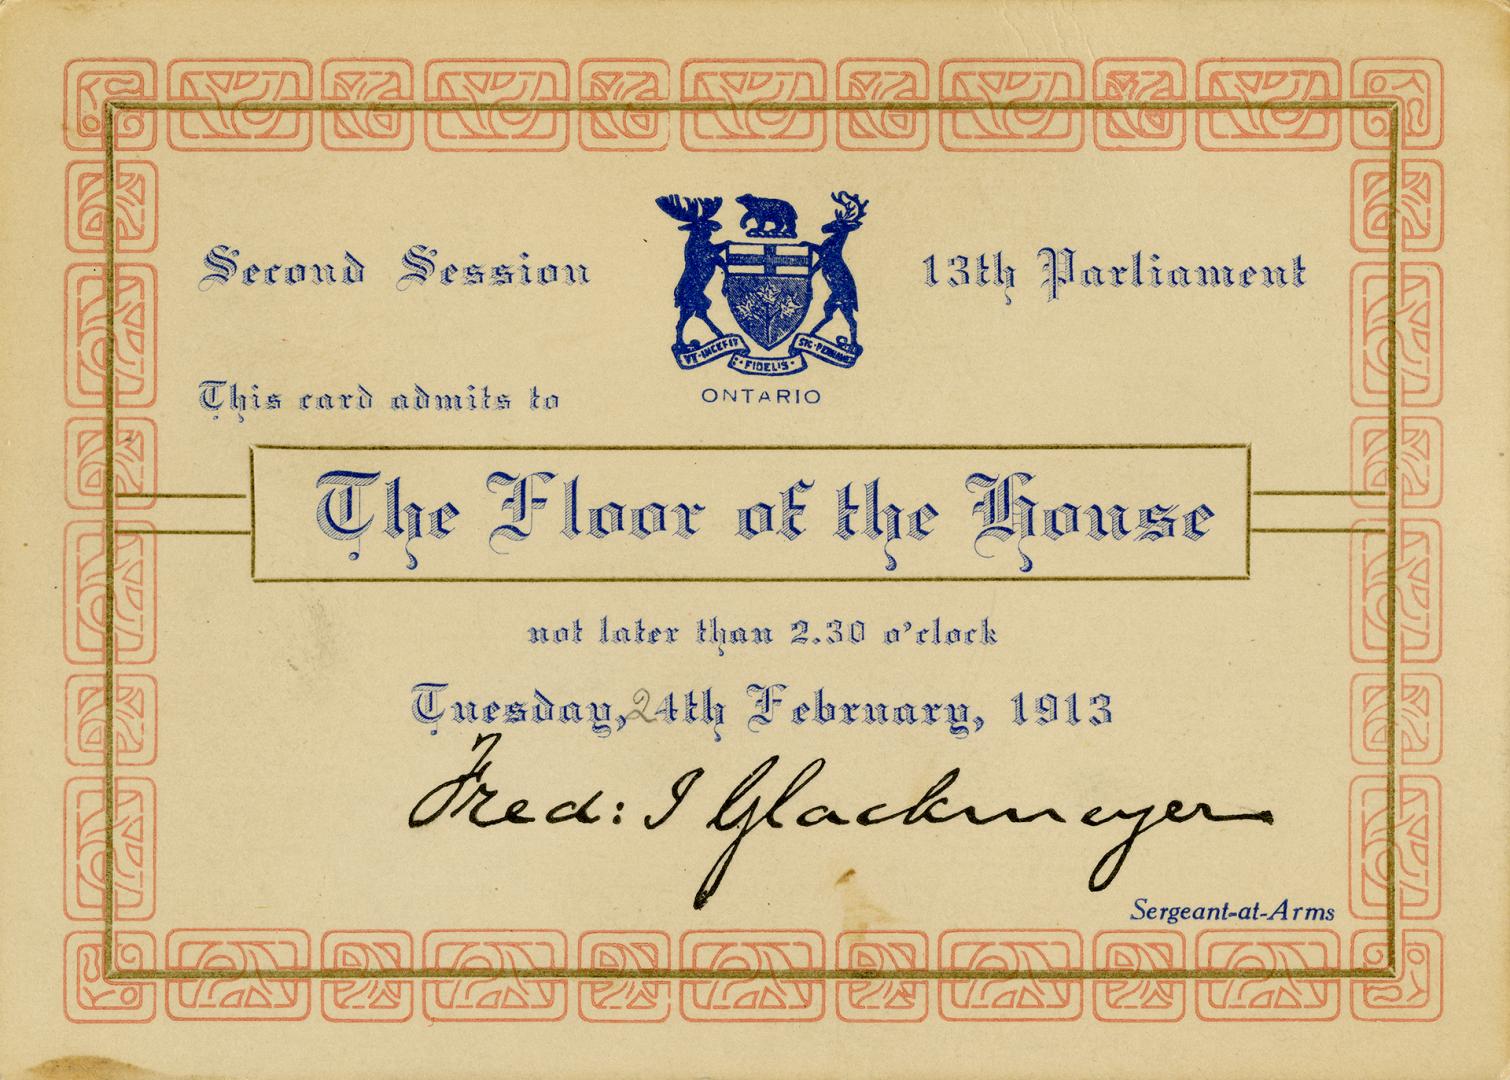 Legislative Assembly, Ontario : second session, 13th Parliament : this card admits to floor of the House not later than 2:30 o'clock, Tuesday, 24th February, 1913